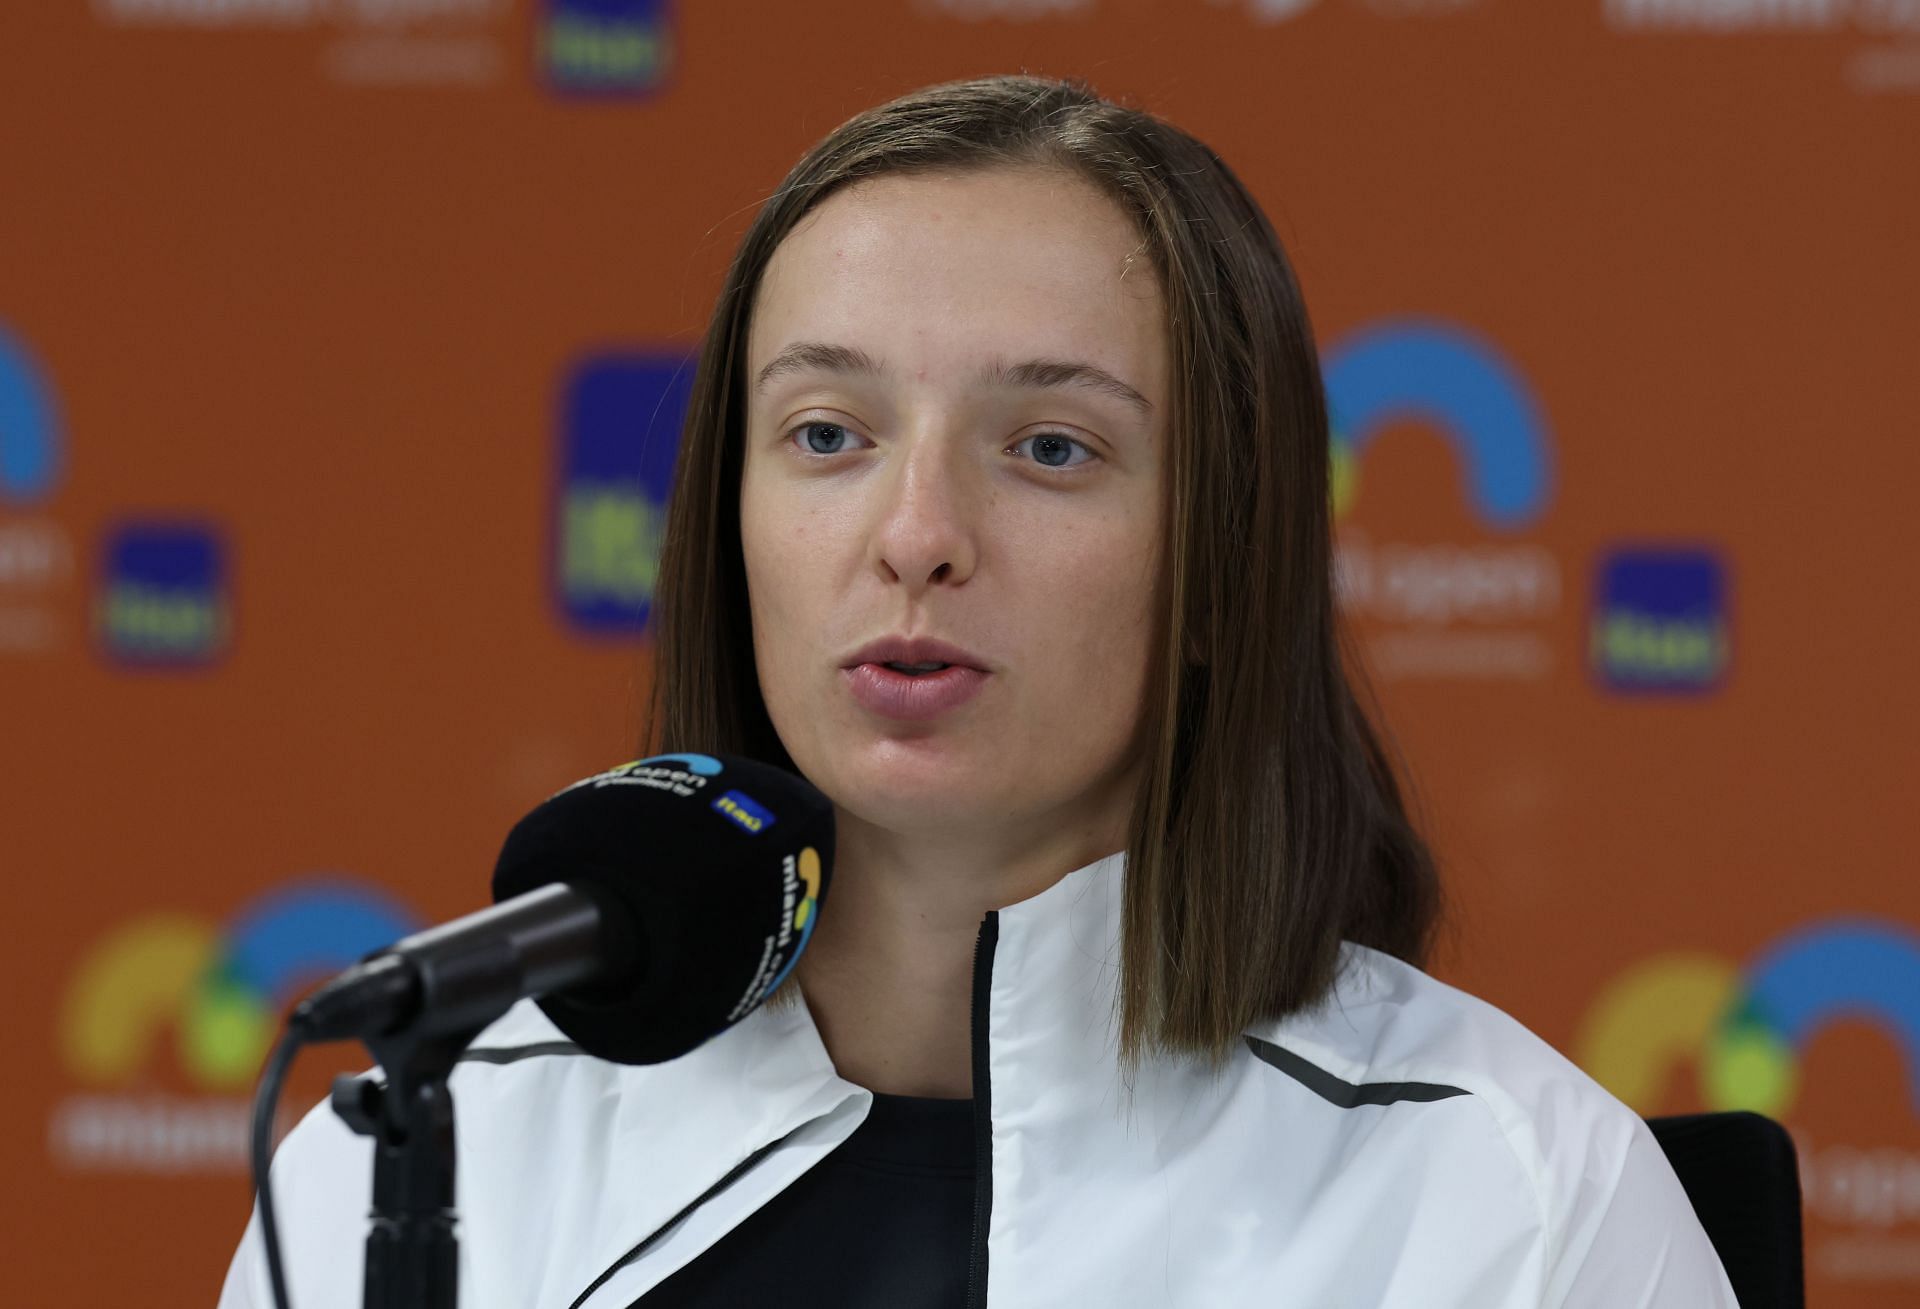 Iga Swiatek speaking following her withdrawal from the Miami Open